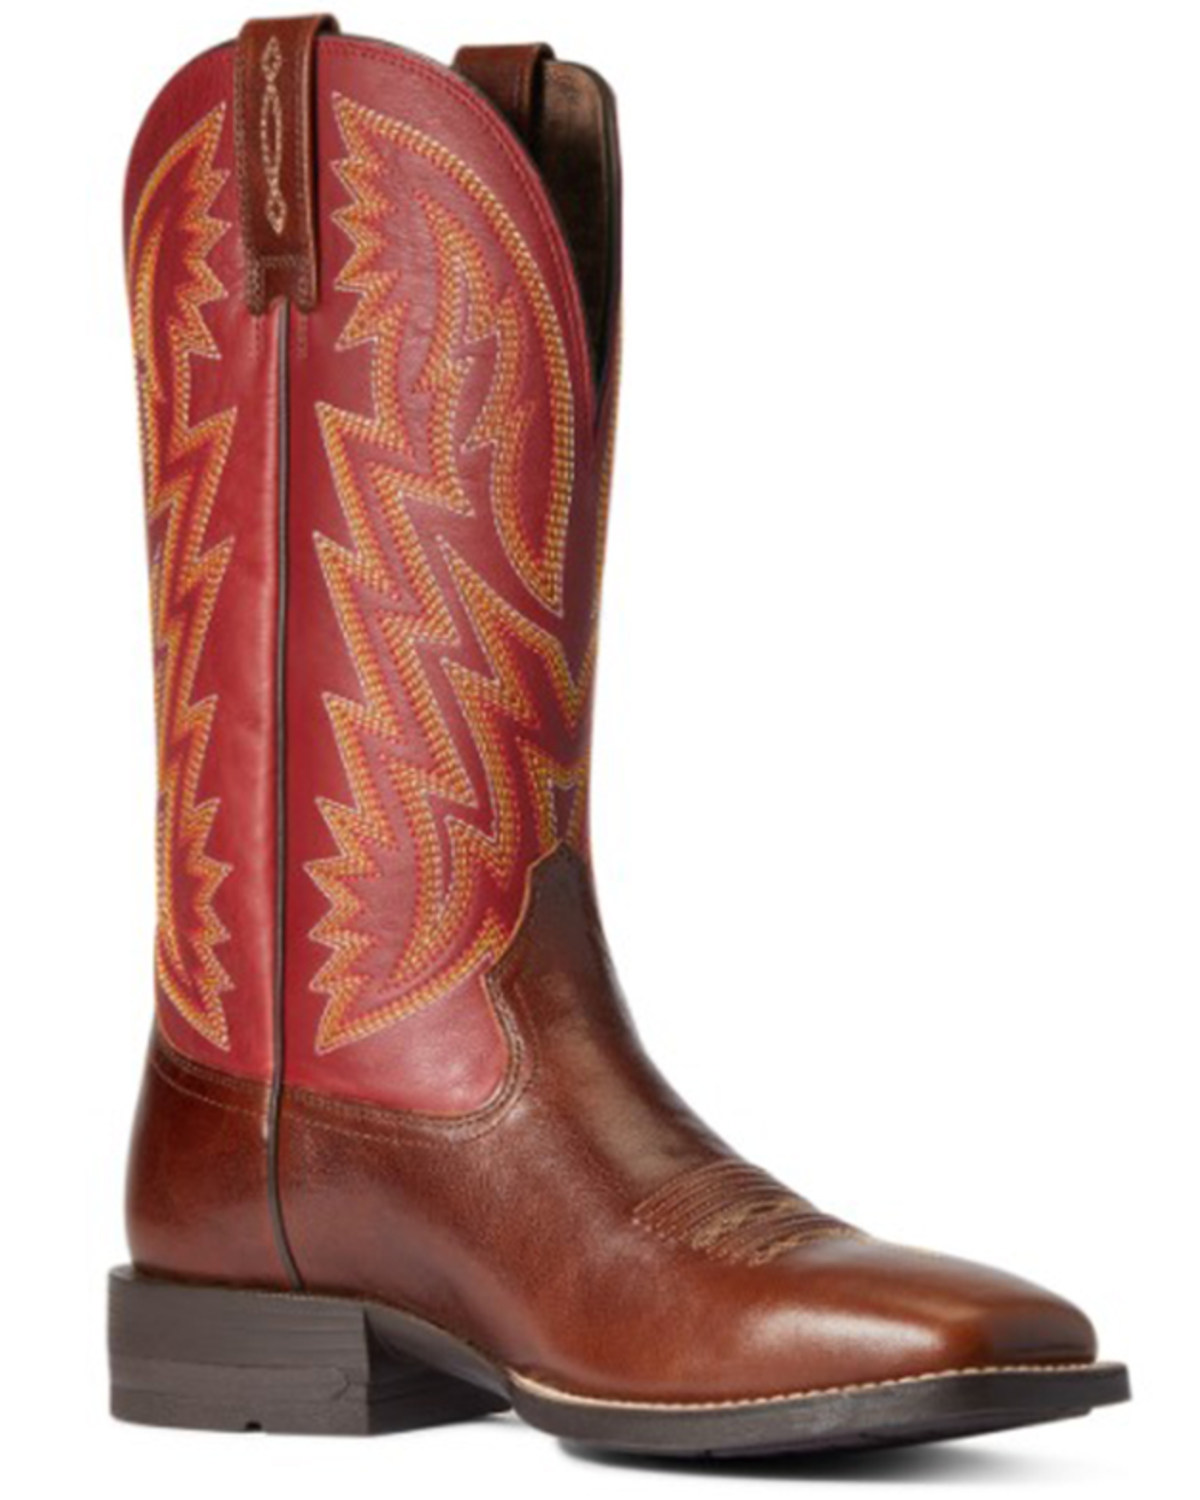 Ariat Men's Crest Macaw Red Dynamic Performance Western Boot - Broad Square Toe